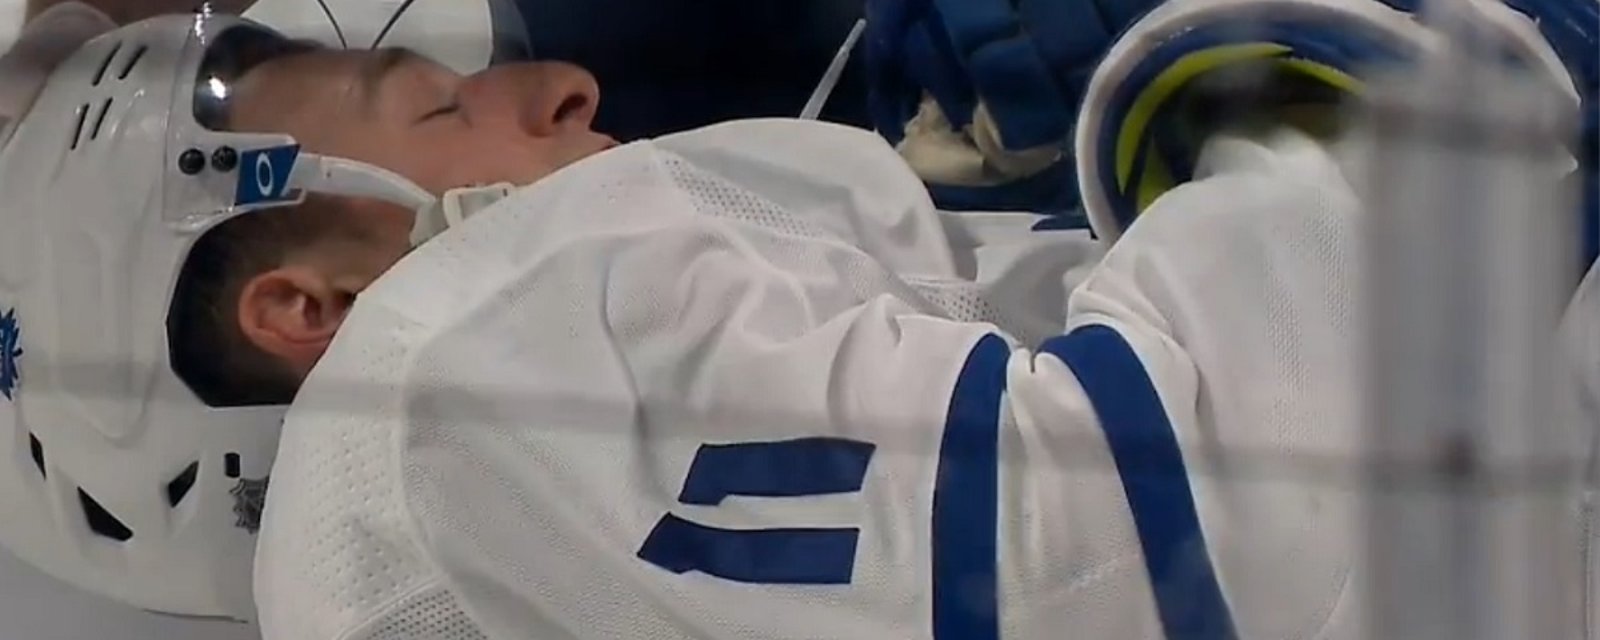 Toronto's Zach Hyman down after a shot to the head in the final game of the season.